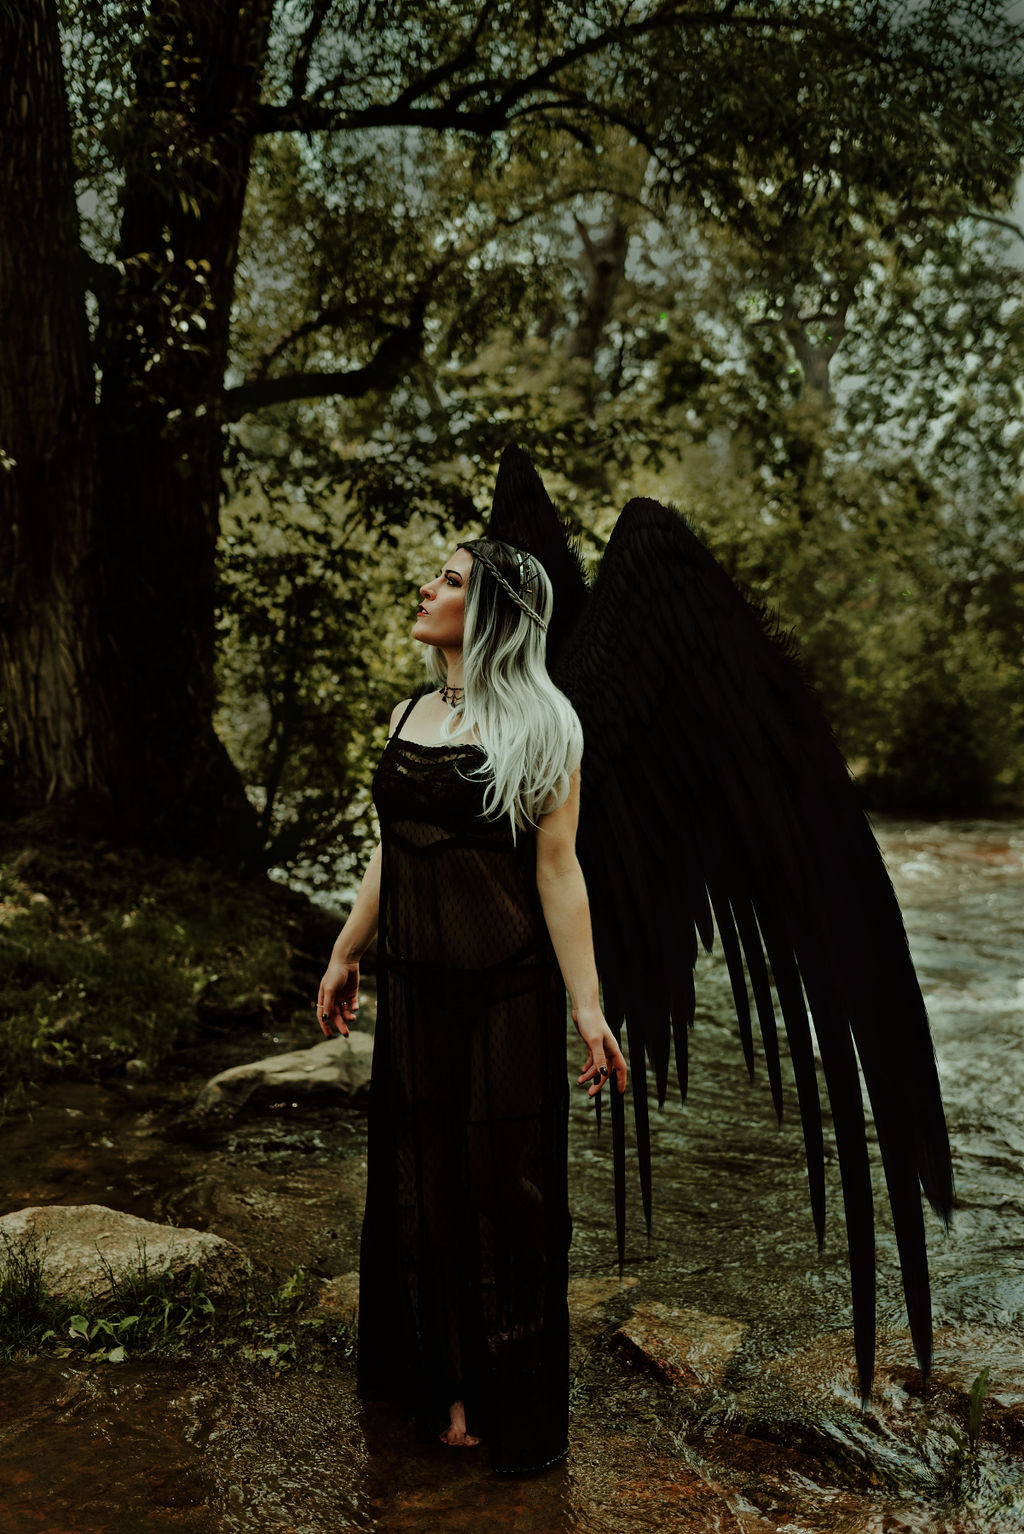 A woman stands in a forest with a river in the background. The woman has a pair of large black wings attached to her back